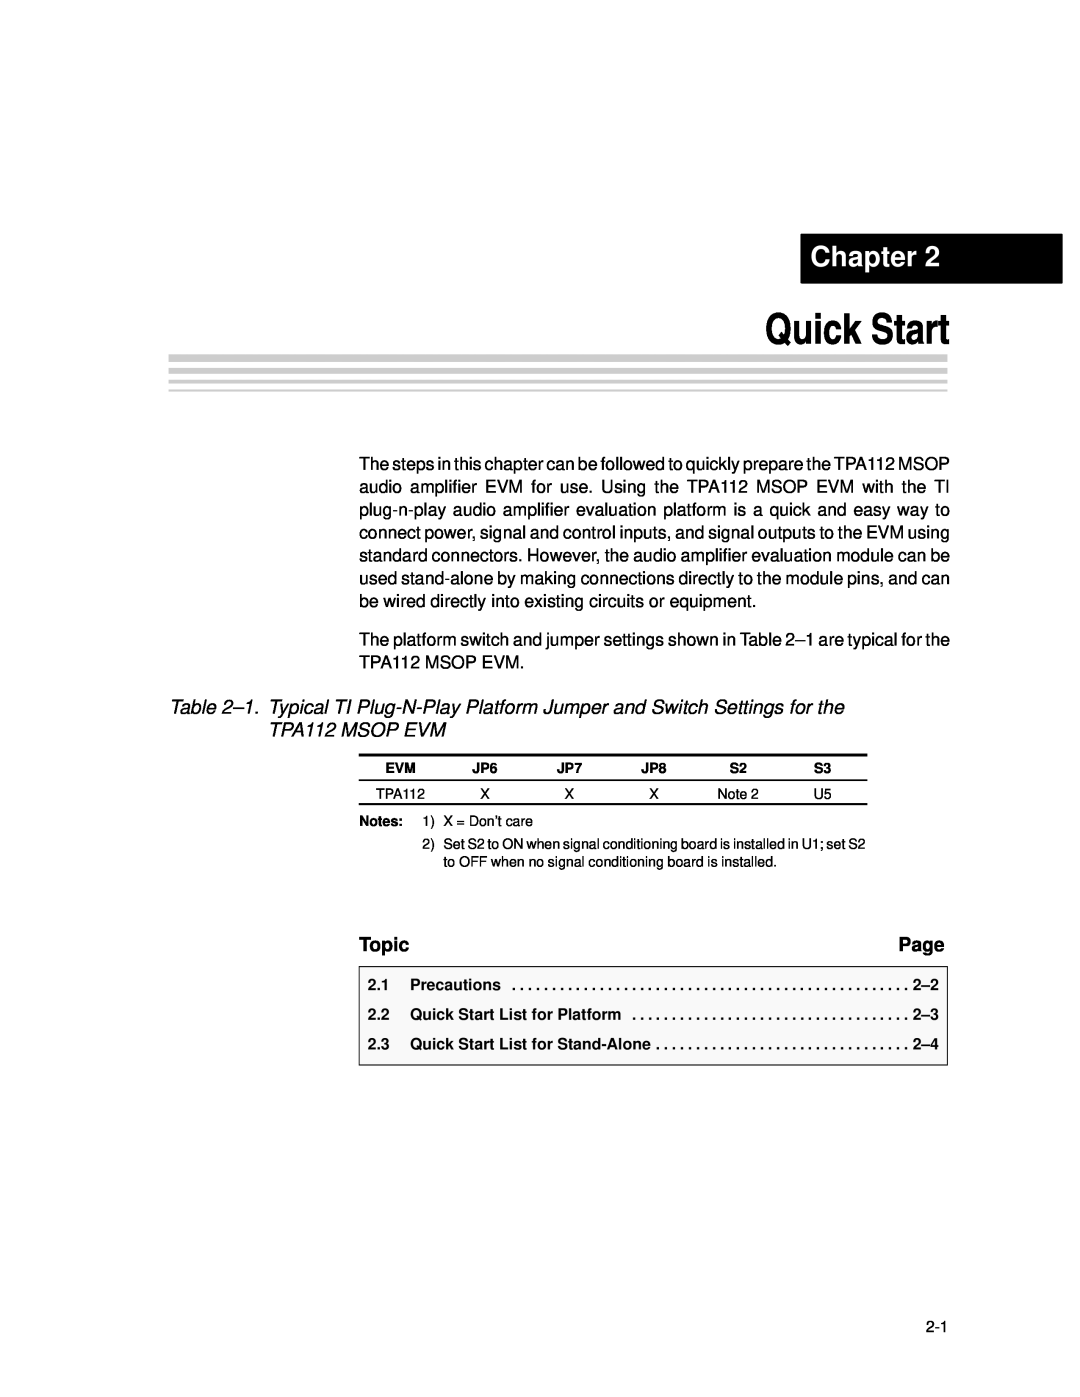 Texas Instruments SLOU023A manual Chapter, Page, Topic, Precautions, Quick Start List for Platform 